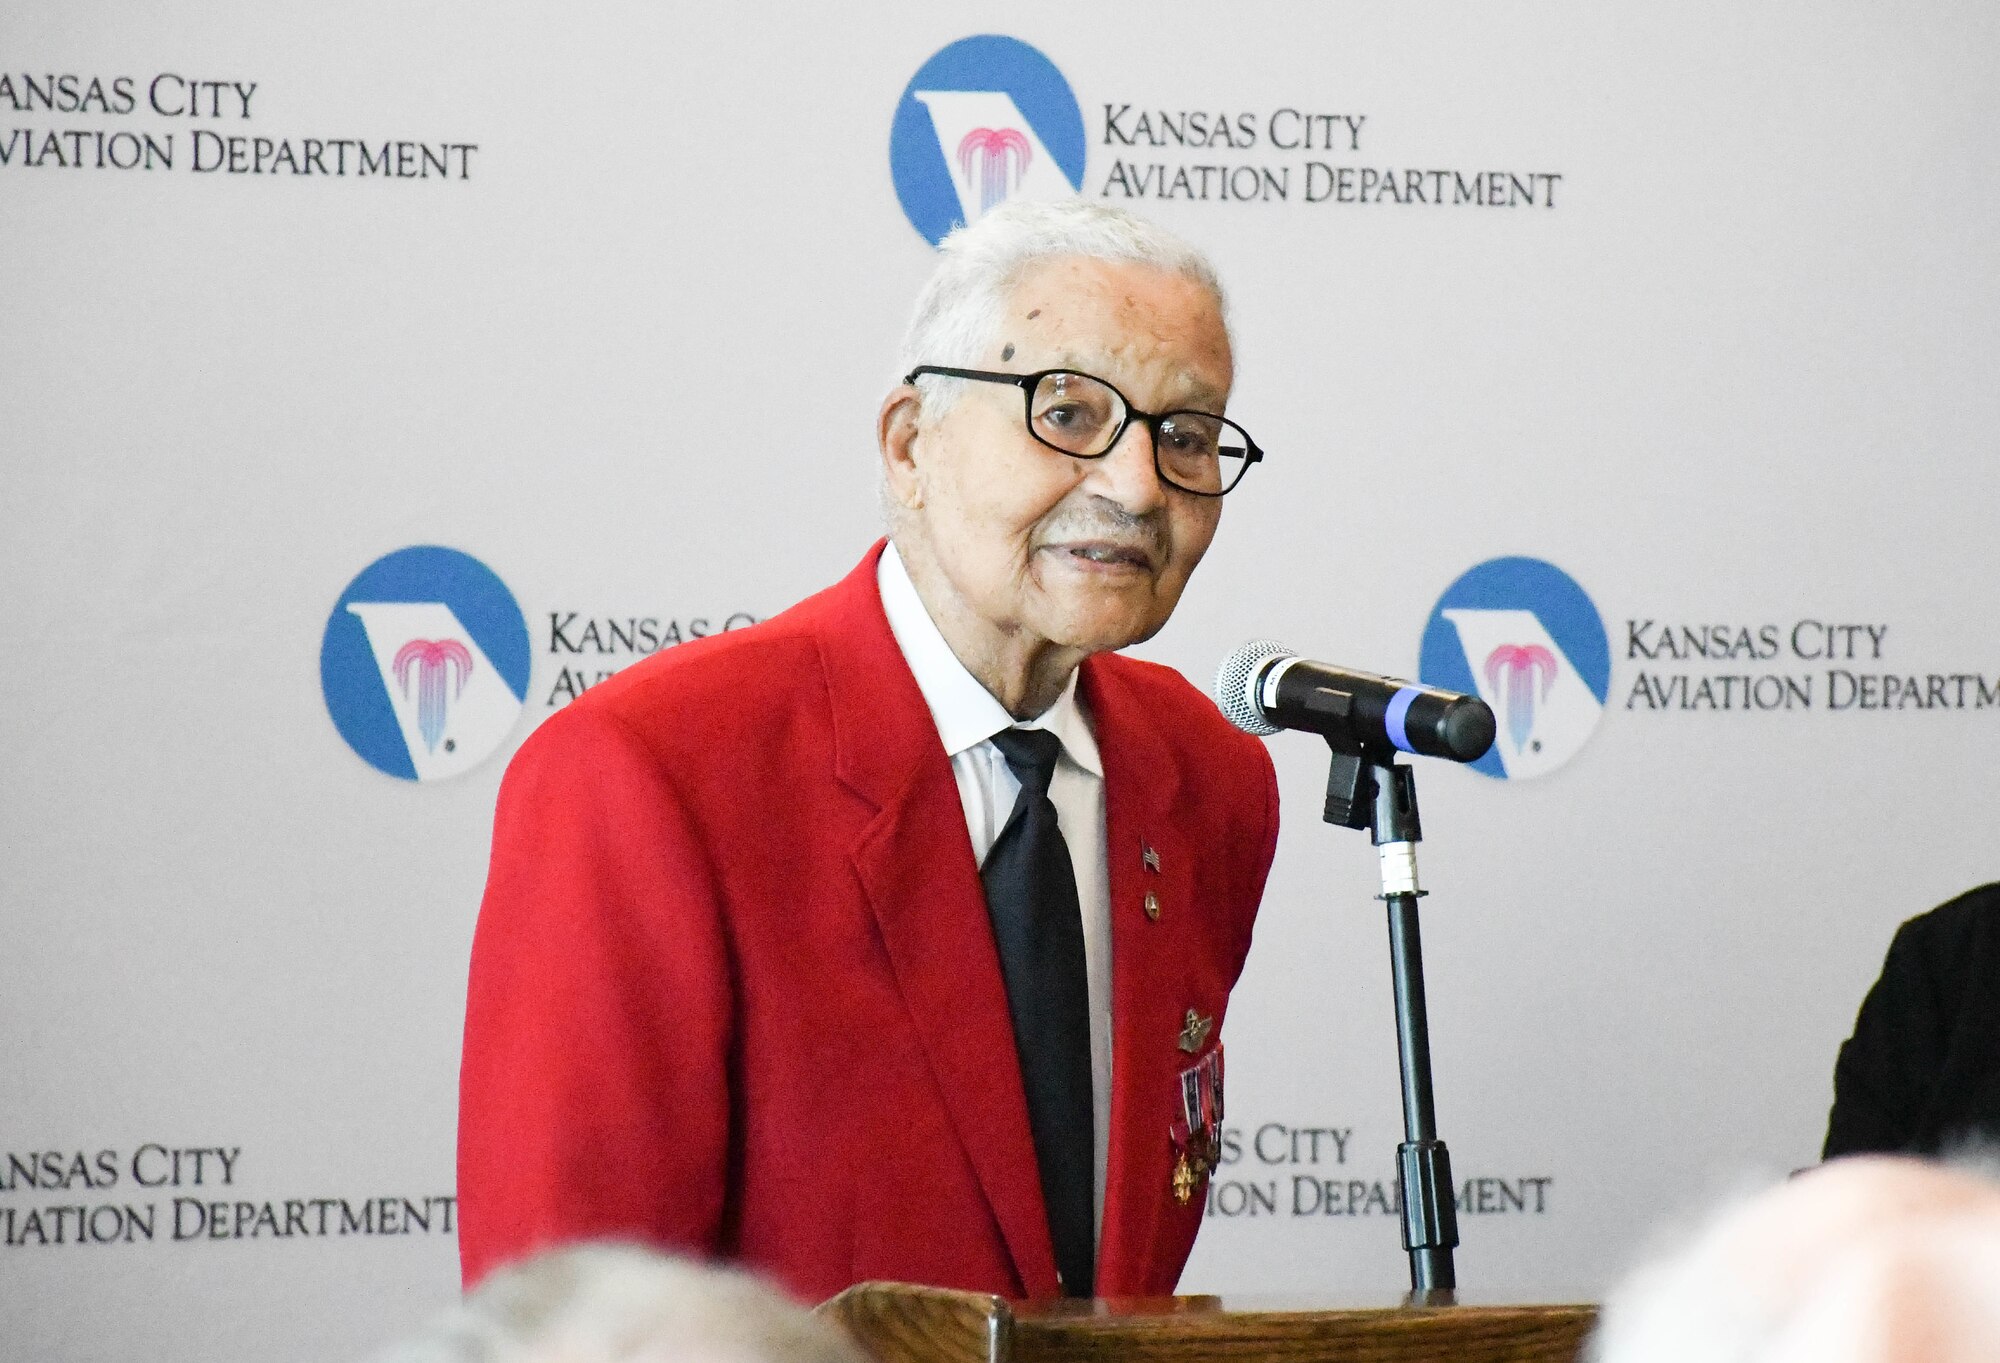 Tuskegee Airman retired Brig. Gen. Charles E. McGee speaks at the ceremony dedicating the Charles B. Wheeler Downtown Airport’s general aviation terminal in his honor